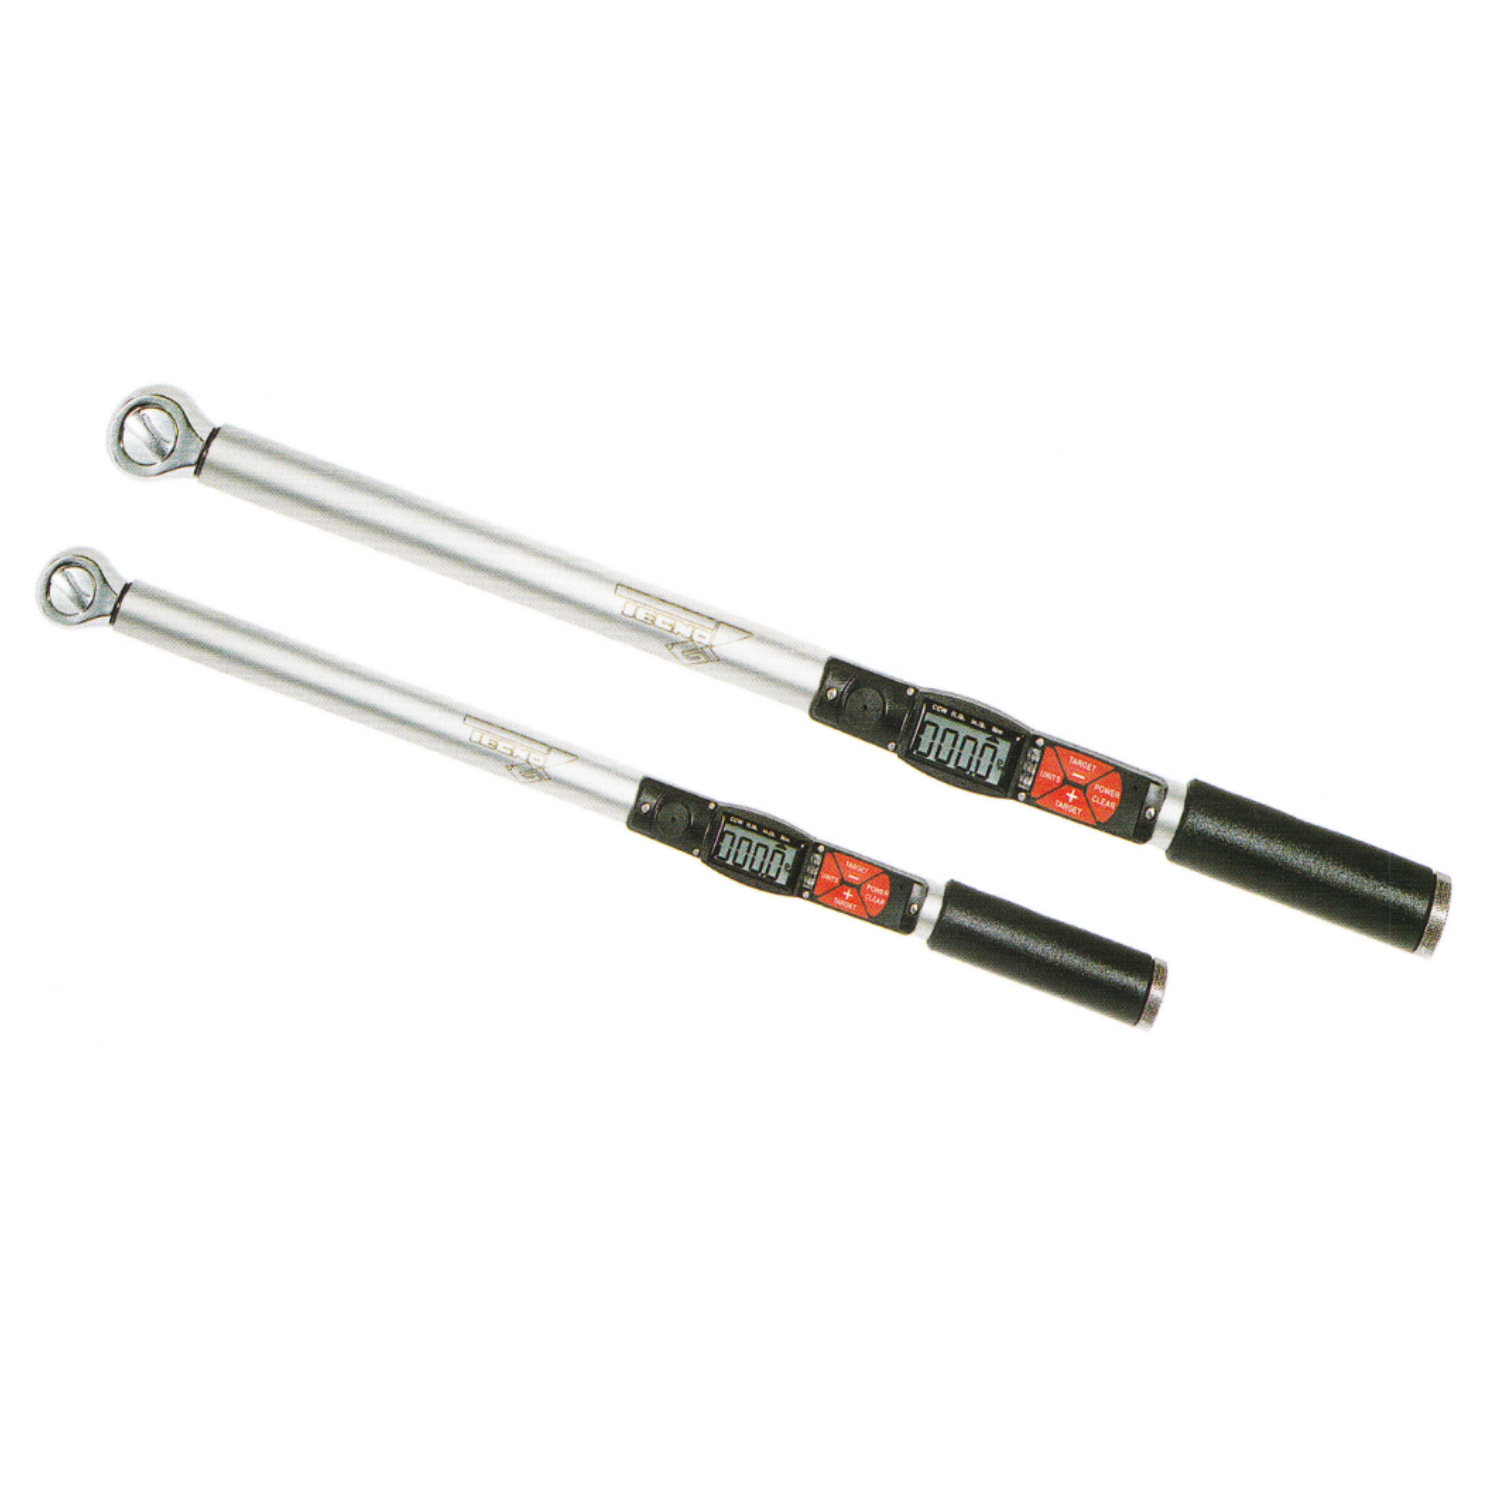 TECNOGI 3534 Digital Torque Wrench with Ratchet 550mm - Premium Digital Torque Wrench from TECNOGI - Shop now at Yew Aik.